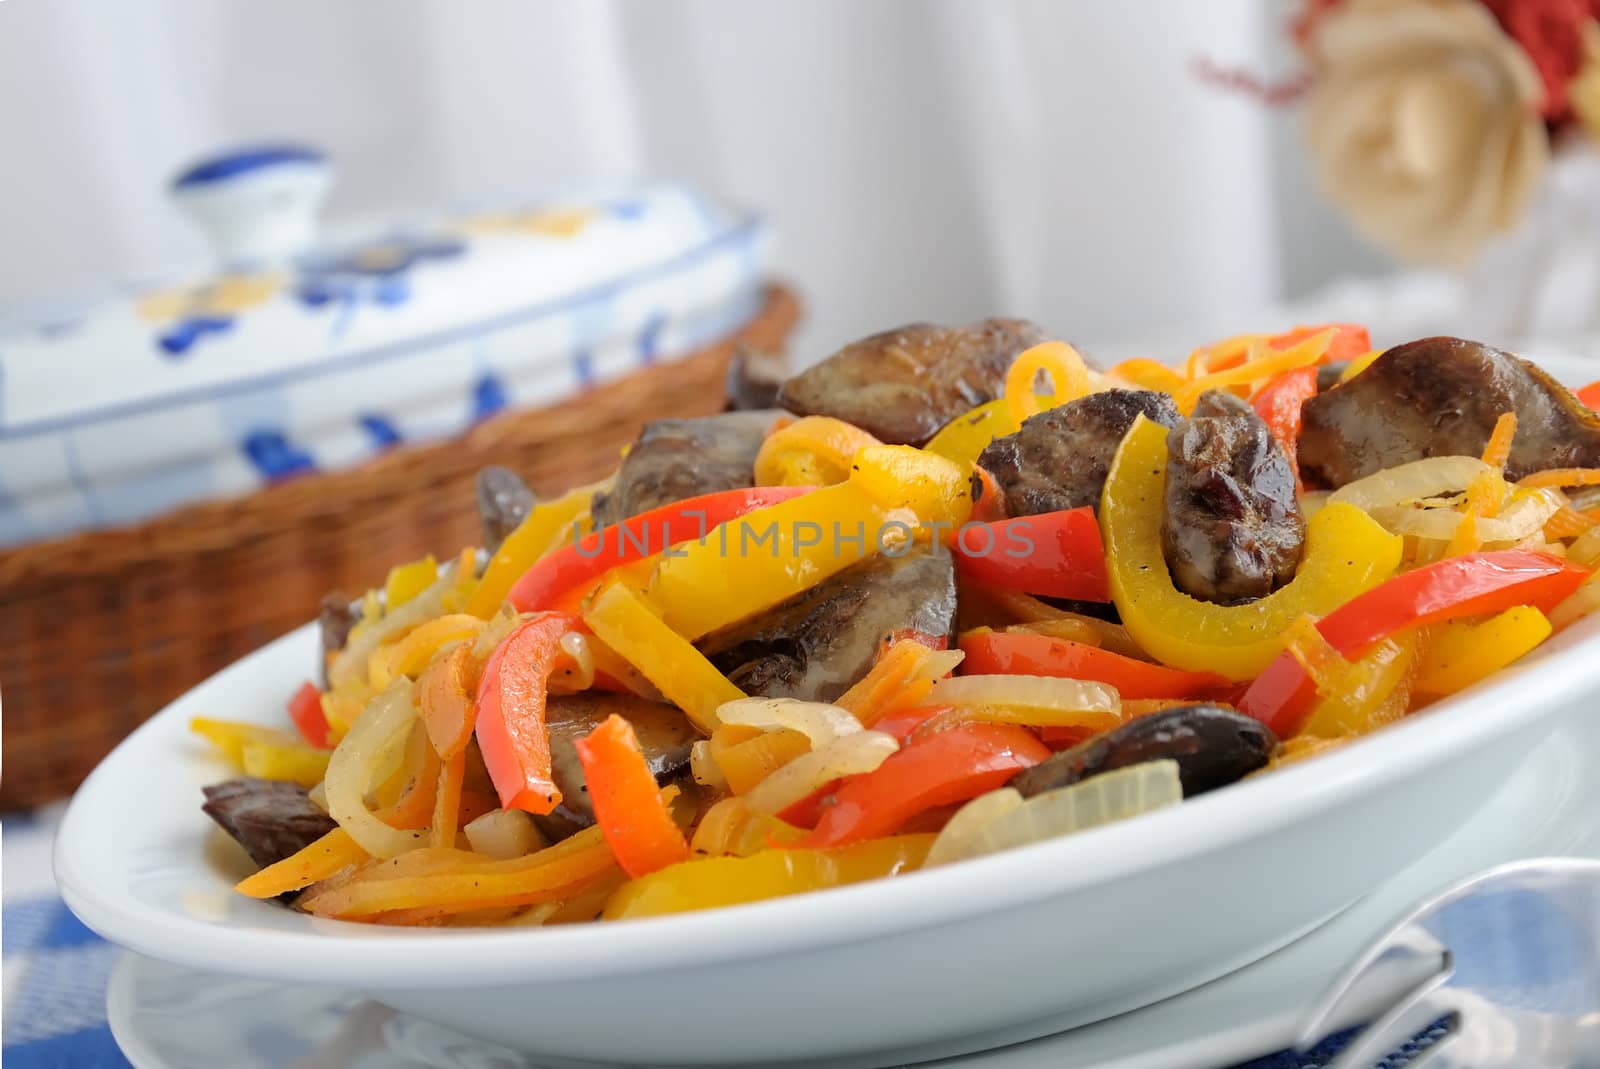 Chicken liver with vegetables by Apolonia